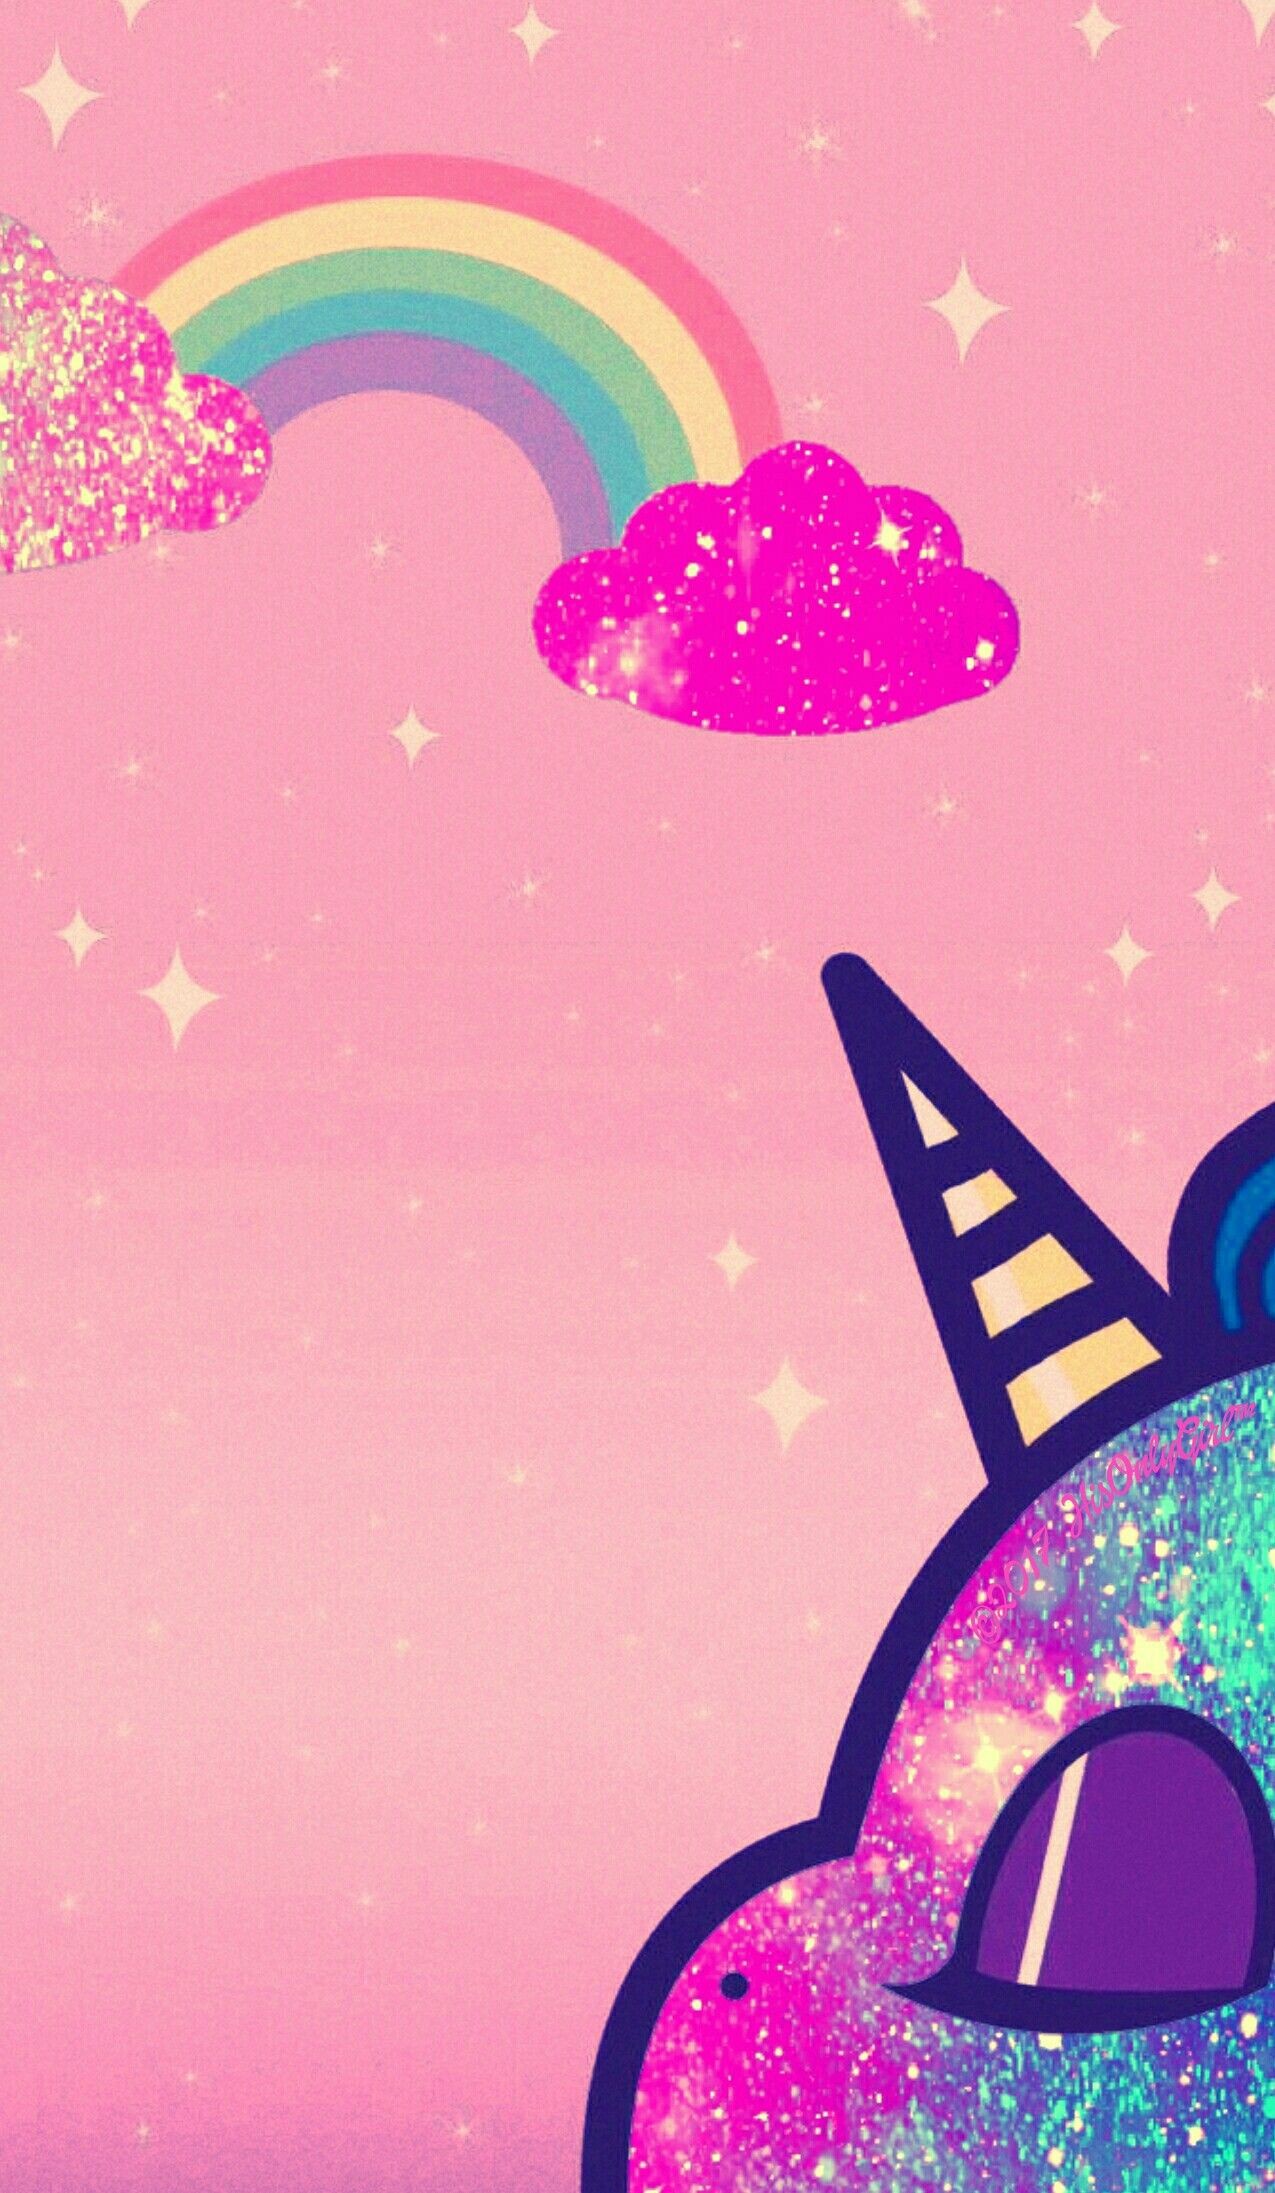 1275x2193 Sweet unicorn galaxy iPhone/Android wallpaper I created for the app CocoPPa.